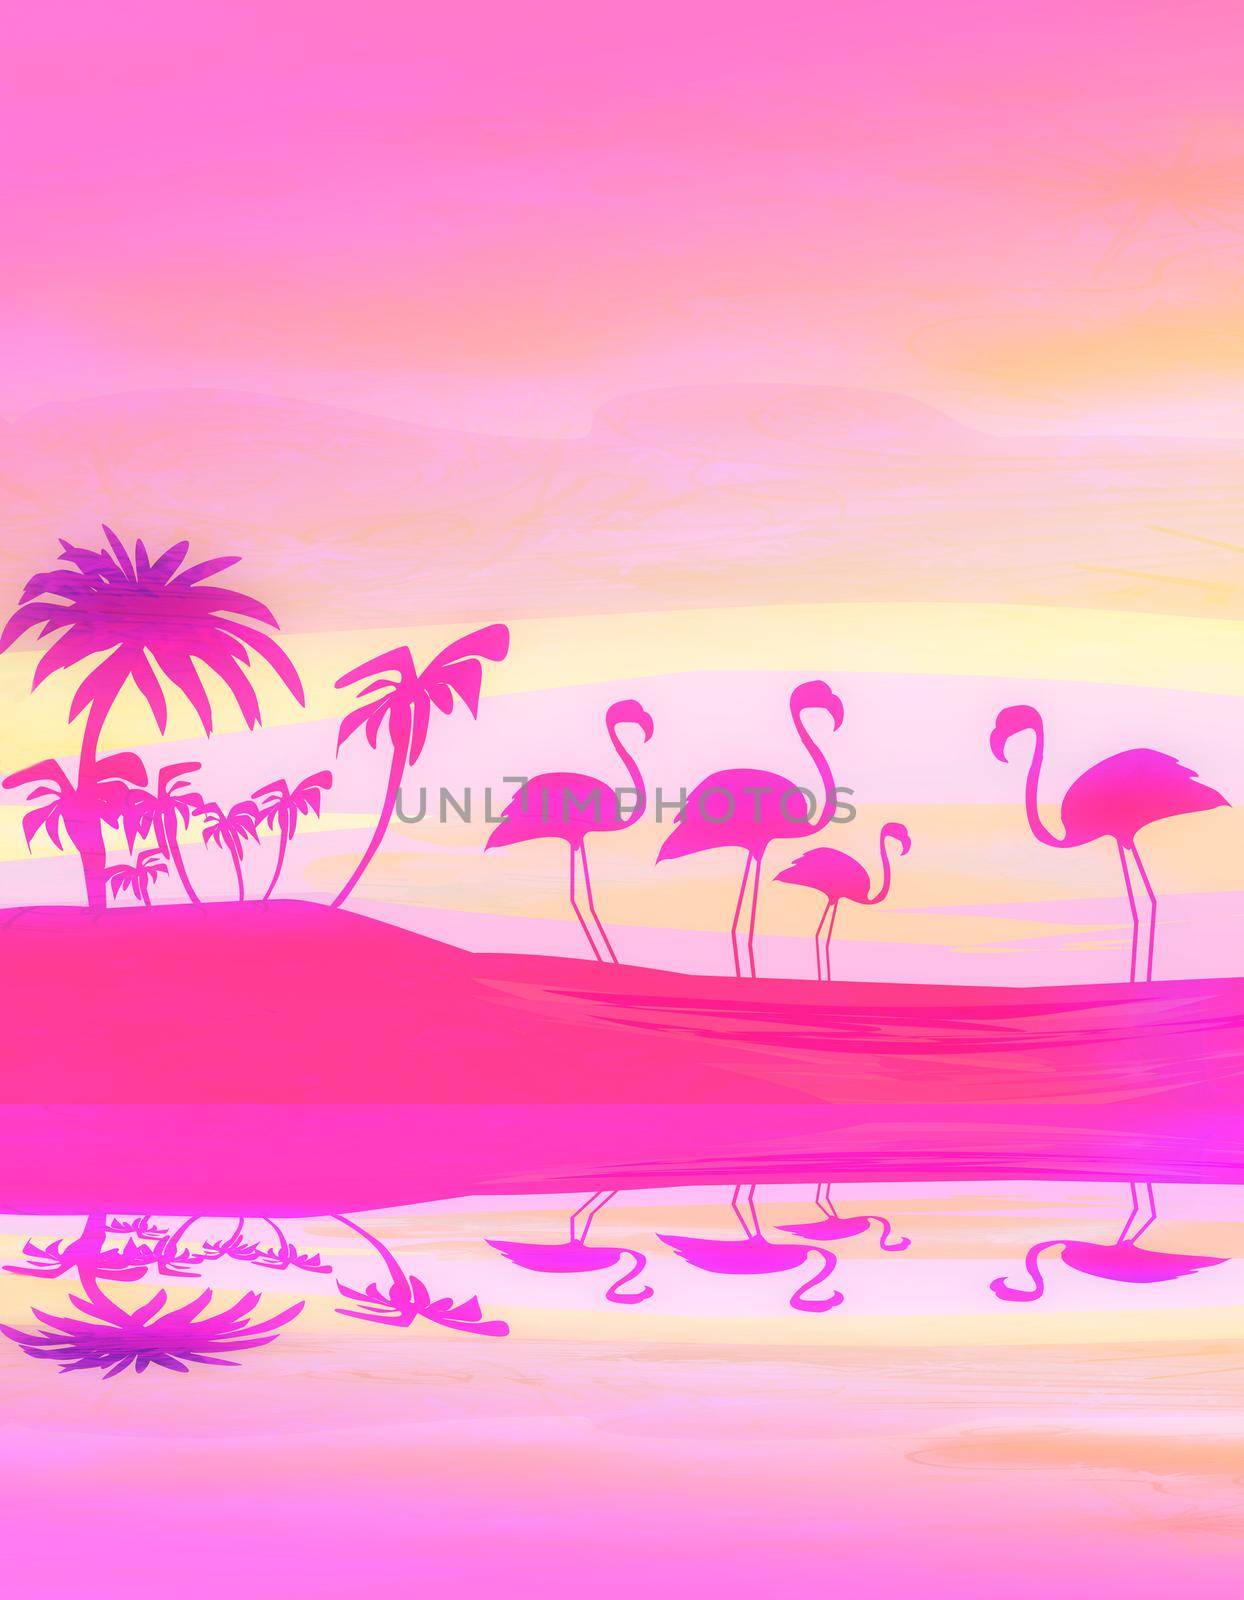 flamingos in wild nature landscape during sunset, silhouette illustration by JackyBrown